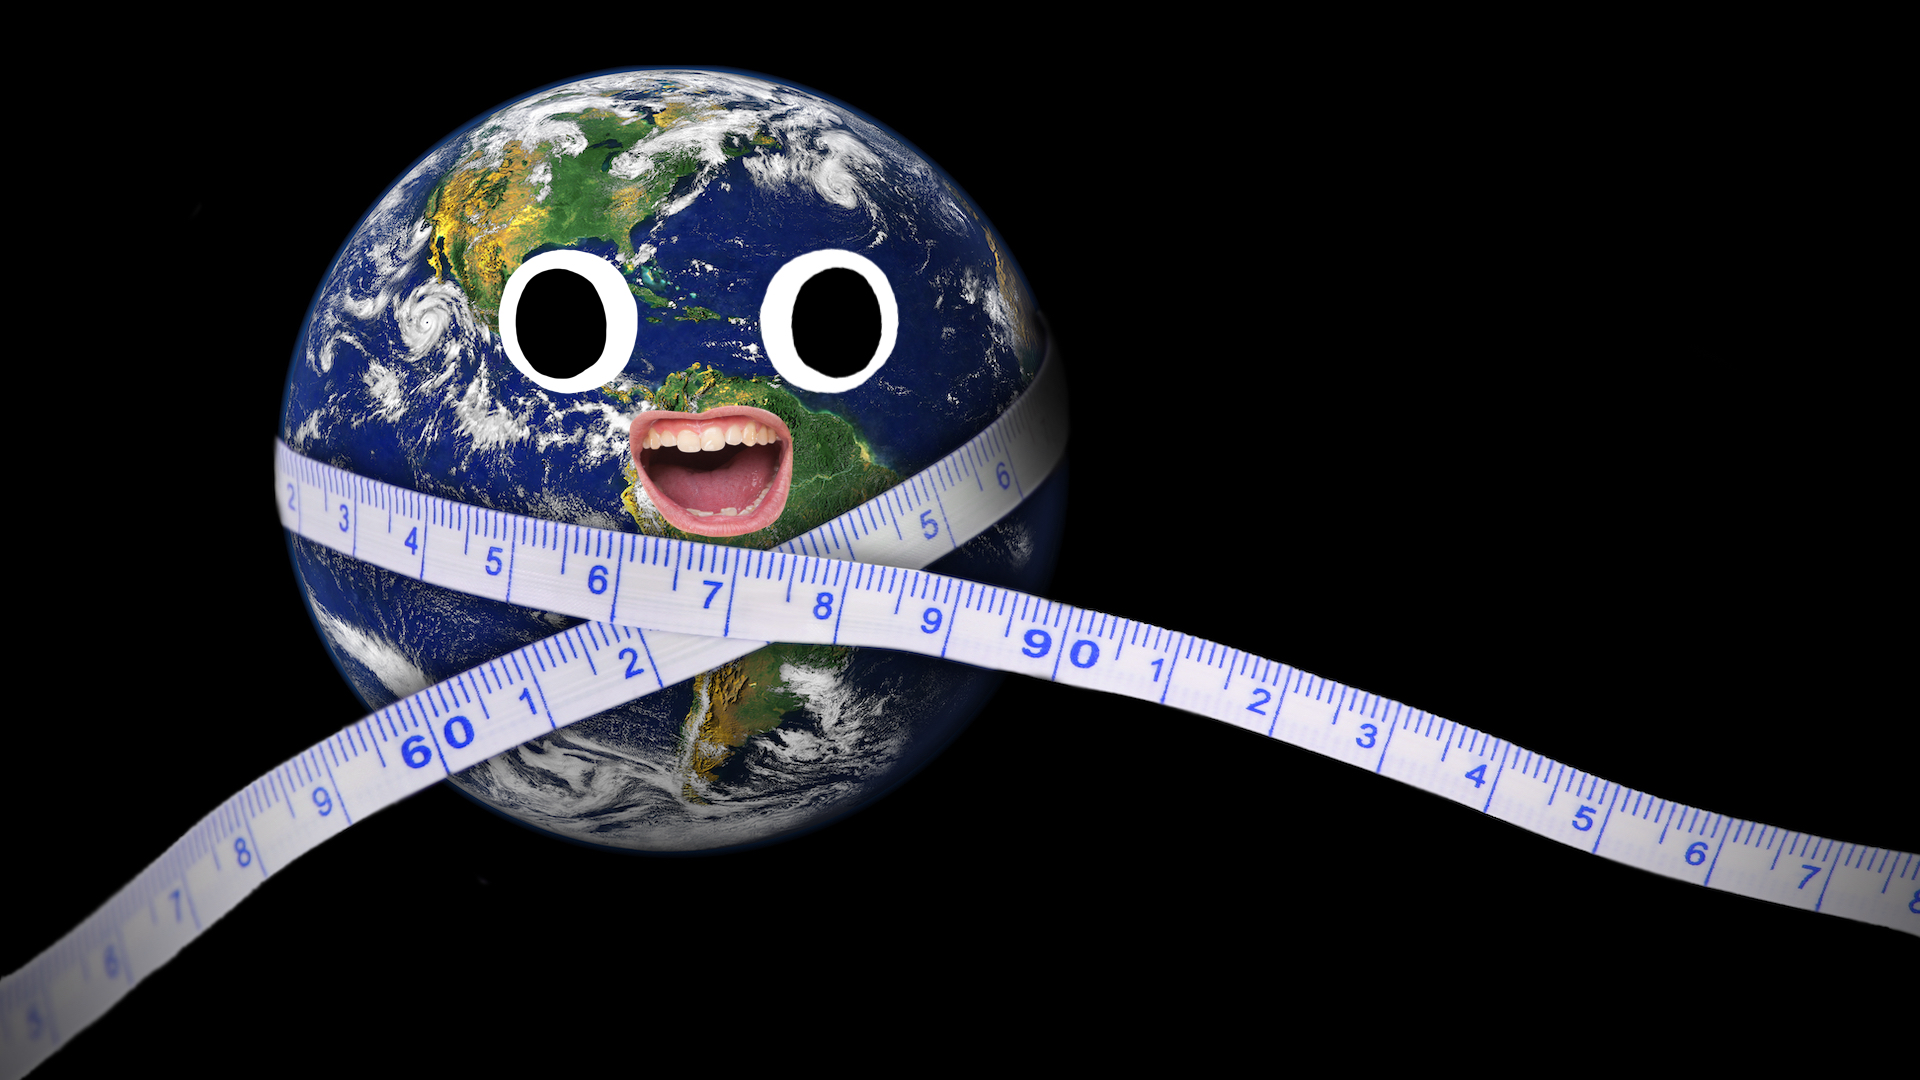 A tape measure going around the earth 